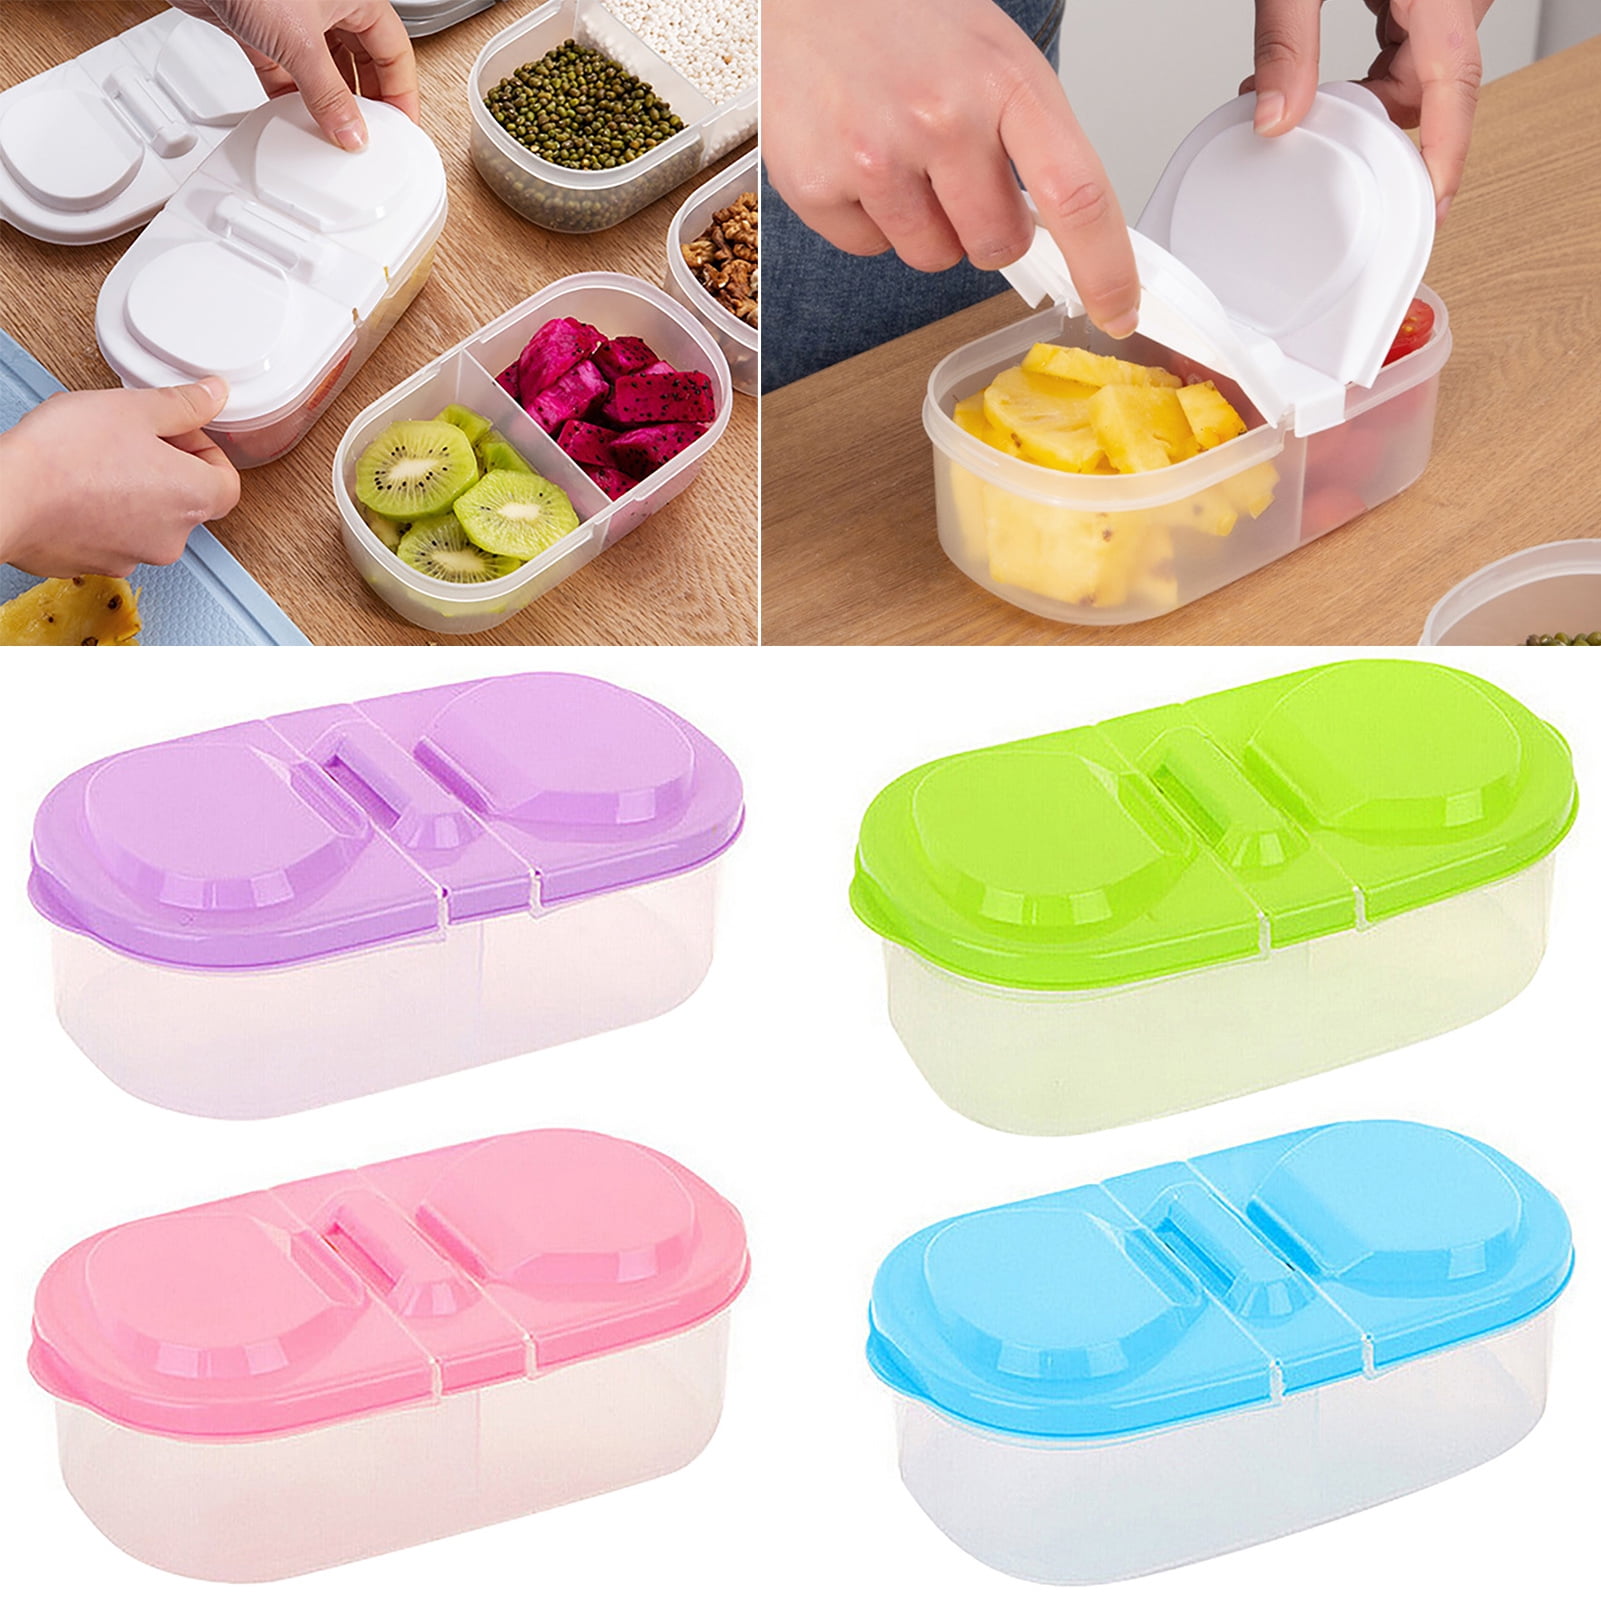 Snack Food Box for Kids, 2 Compartments Food Storage Container